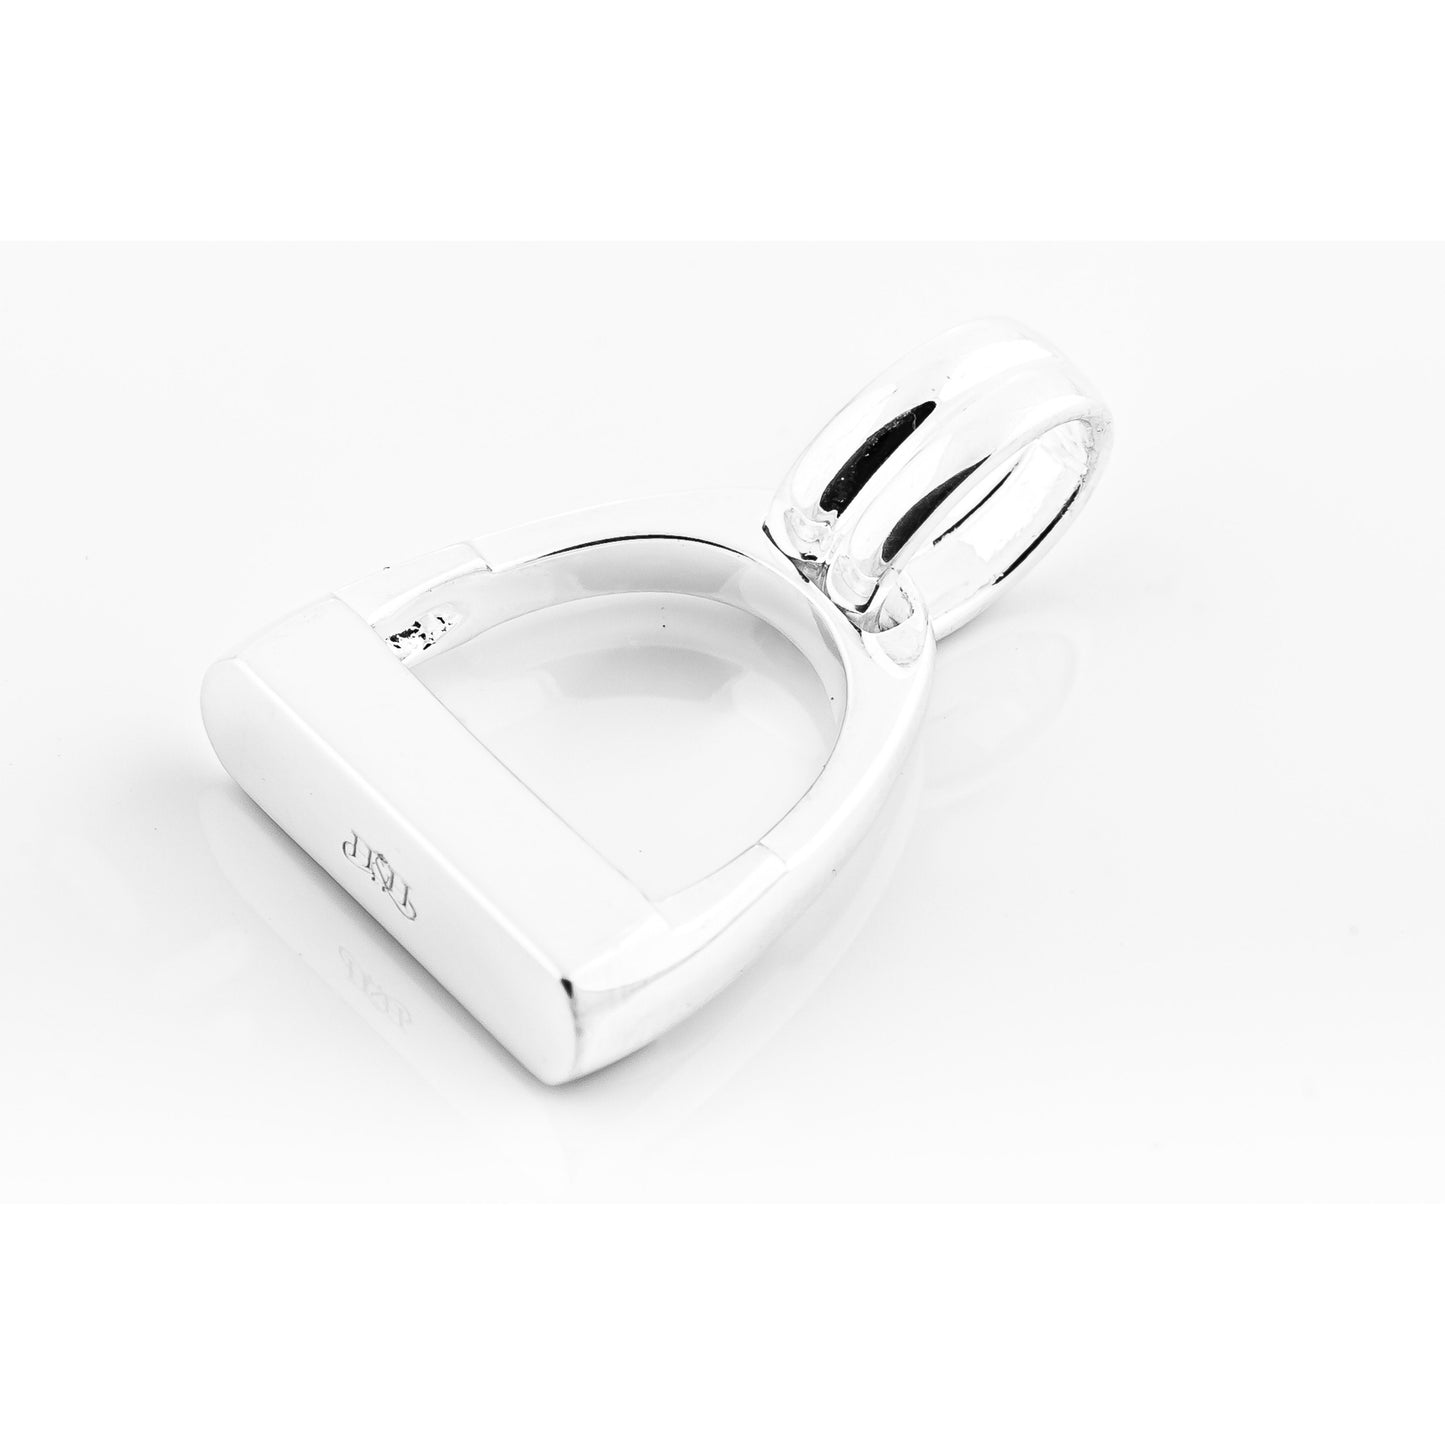 Portable white magnifying glass closed.